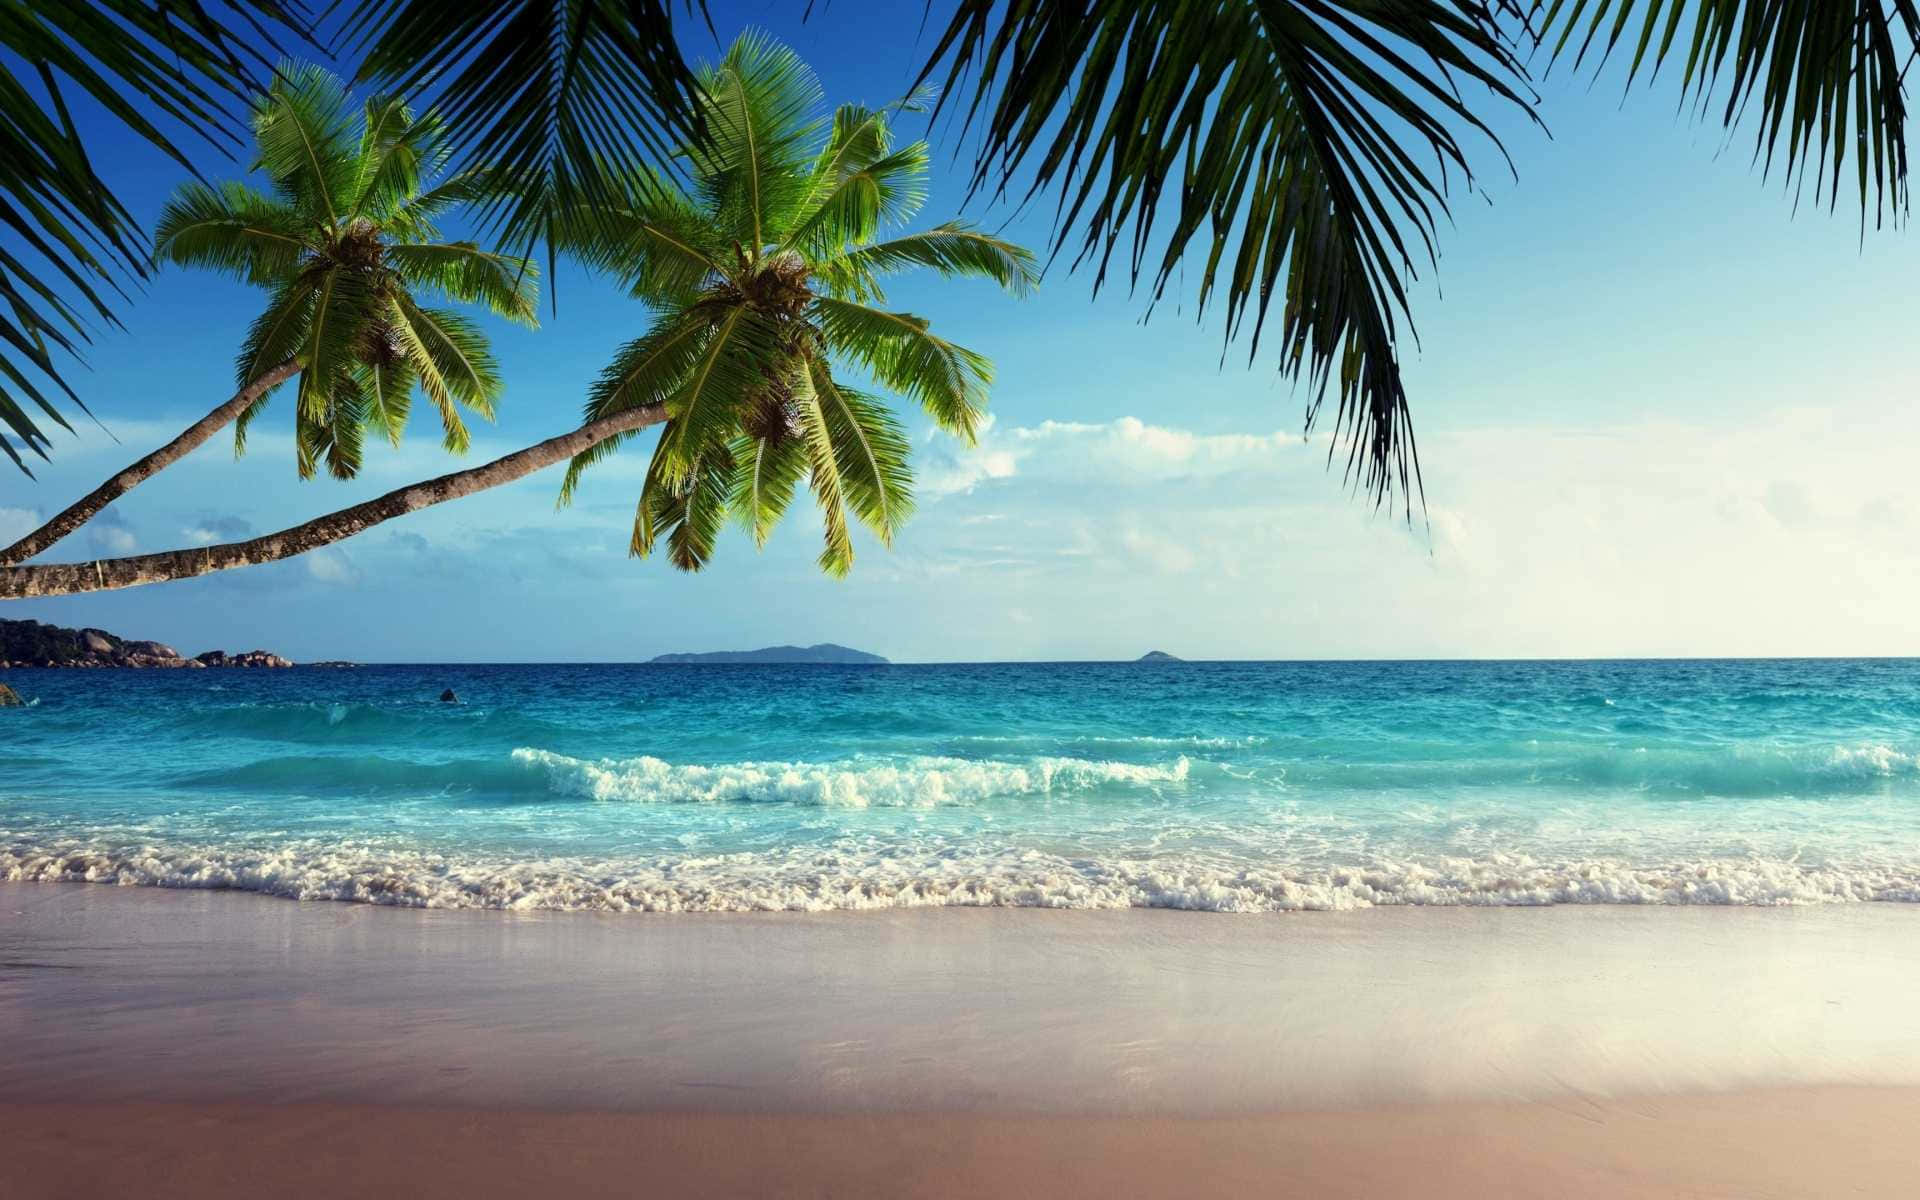 A Beach With Palm Trees And Waves